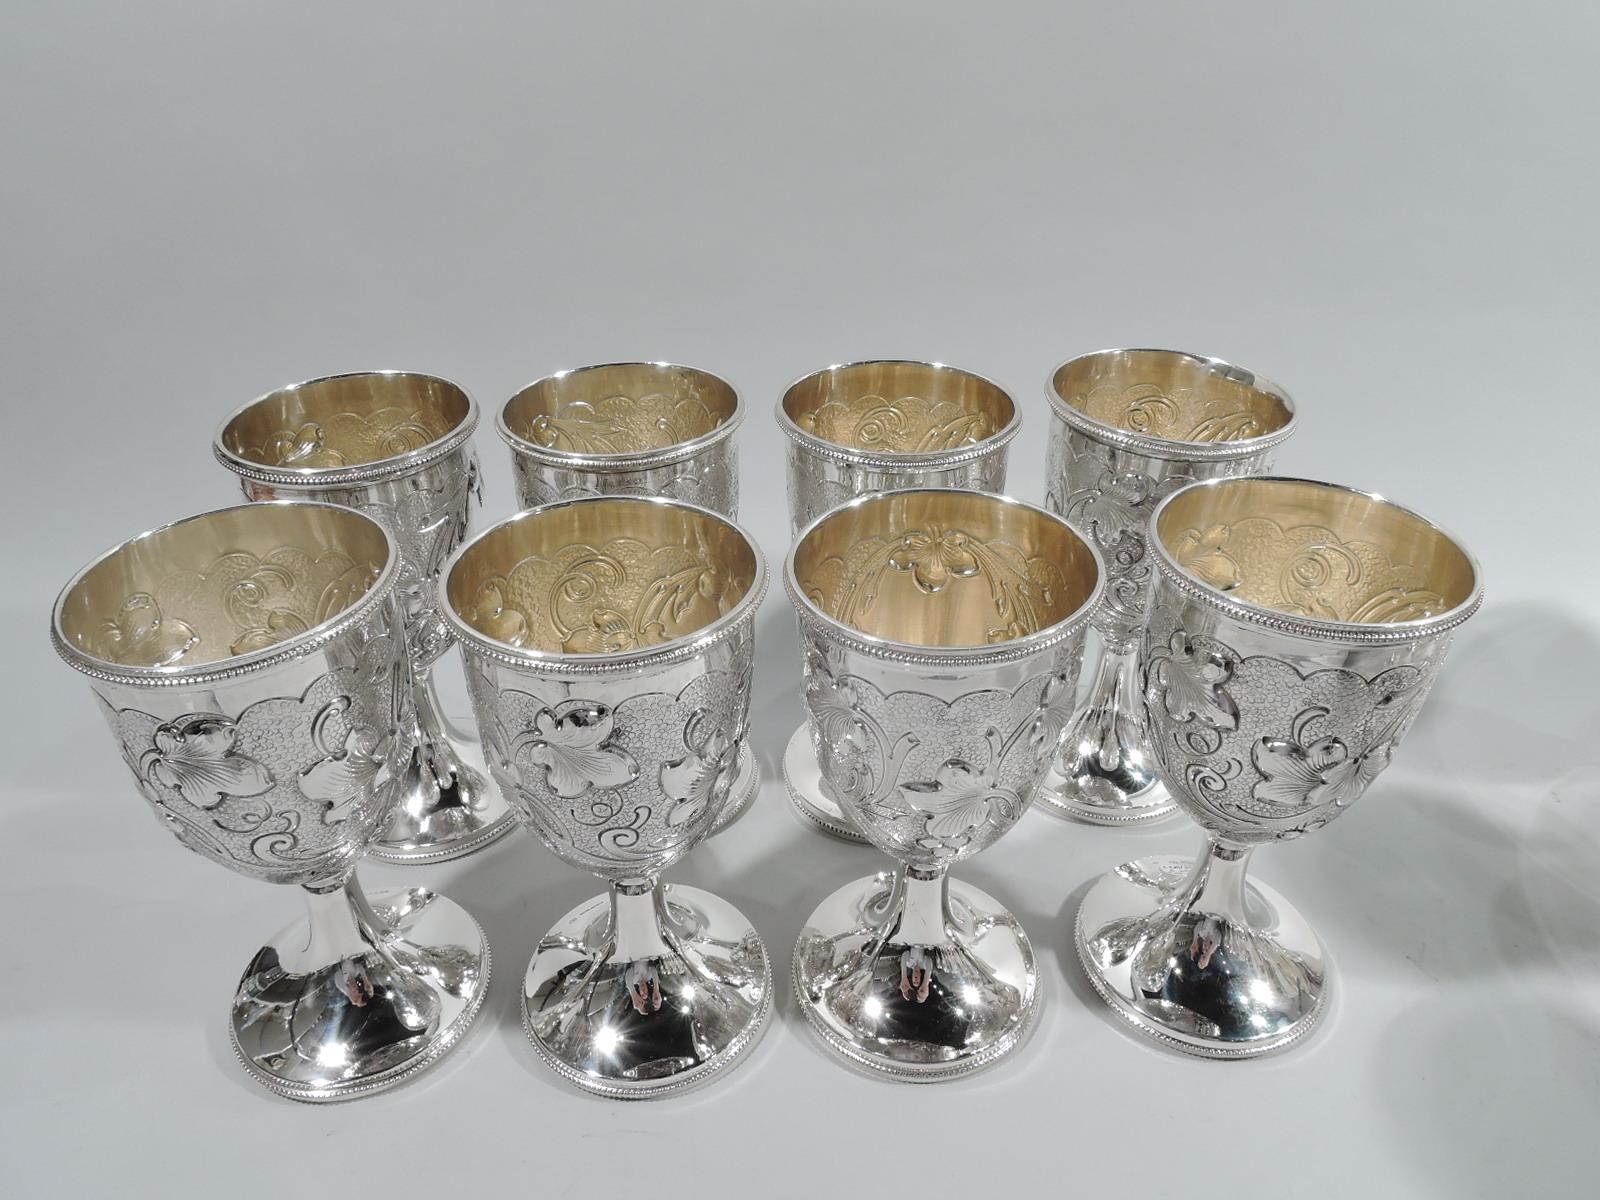 Set of 8 Austrian Art Nouveau 935 silver goblets. Each: Oval bowl with chased and engraved flowers on cloud-style ground between plain scallop (top) and spikey (bottom) borders; oval frame (vacant). Plain stem on raised foot. Beading. Interior